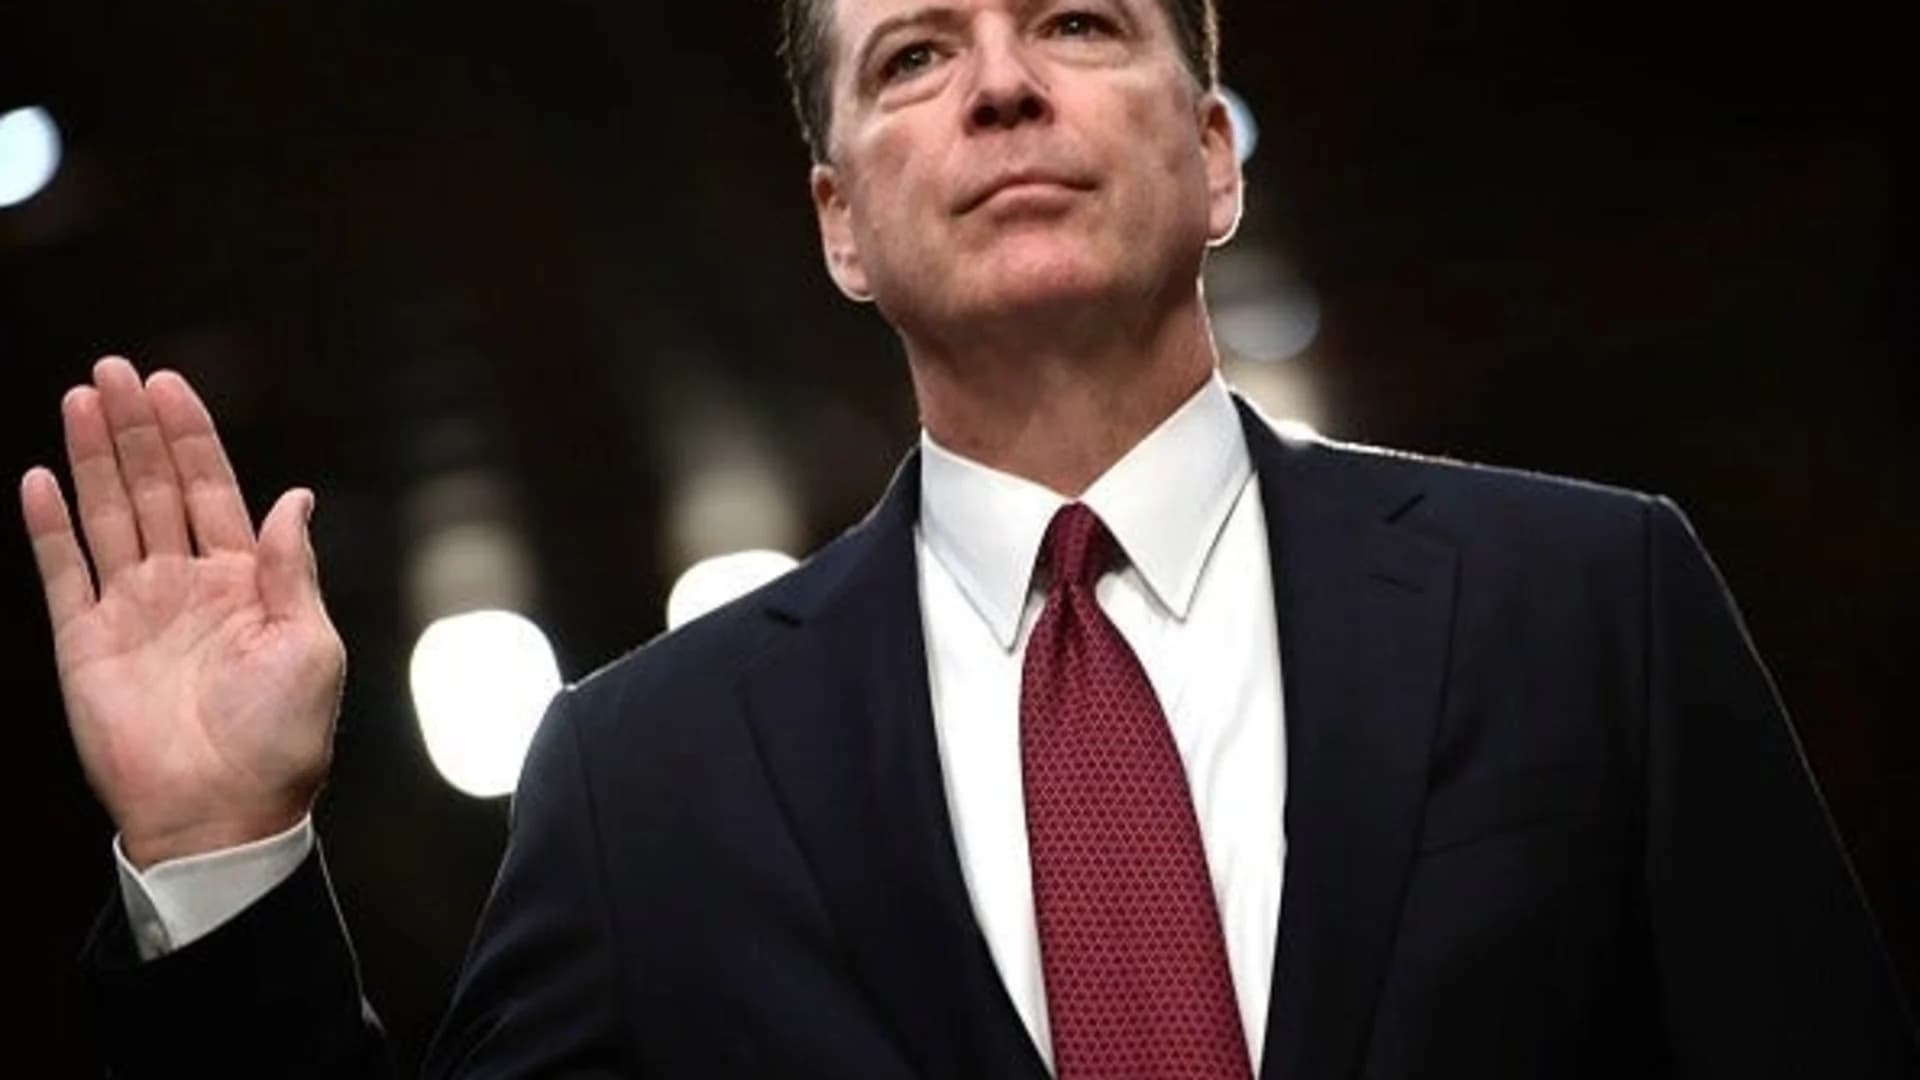 Comey says he was fired because of Russia investigation